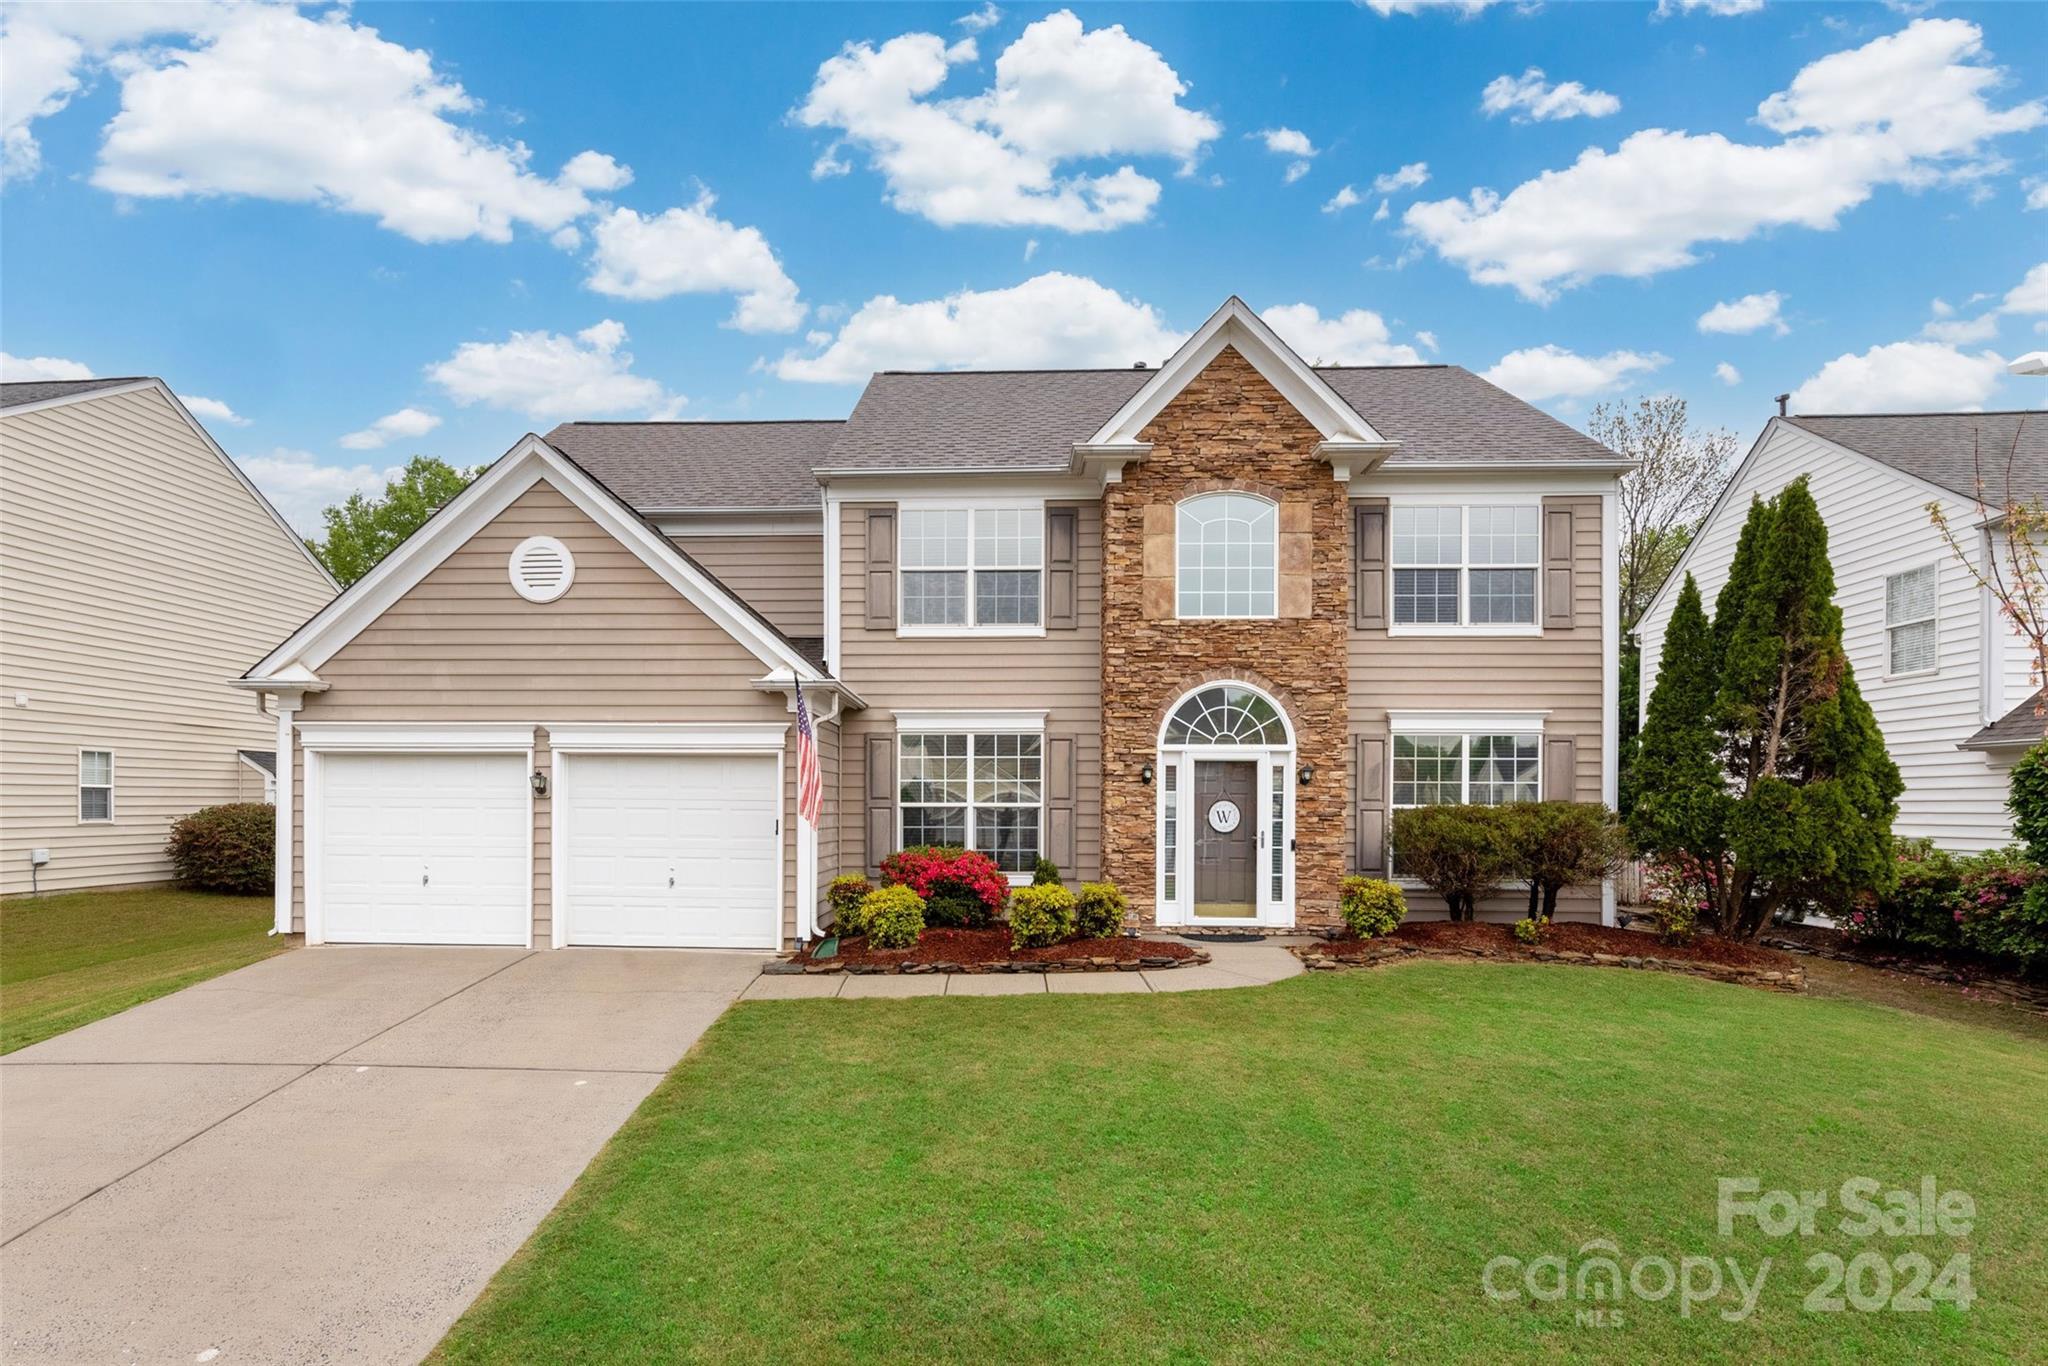 Photo one of 8126 Noland Woods Dr Charlotte NC 28277 | MLS 4128052